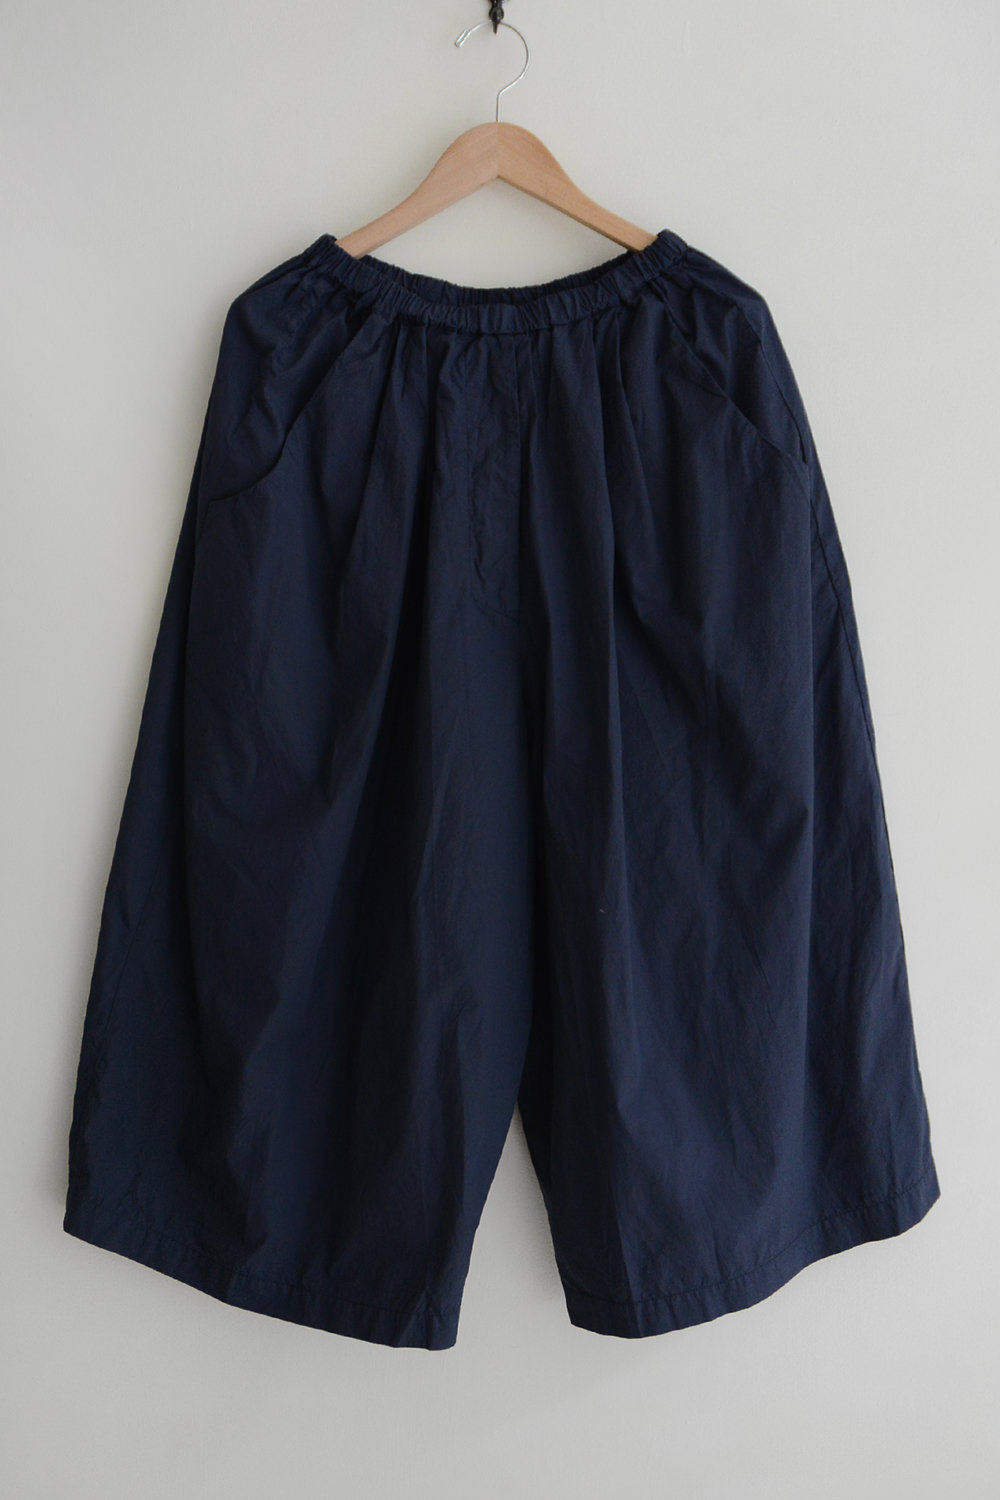 Manuelle Guibal Cotton Pants Wide Style Dark Navy Top Picture